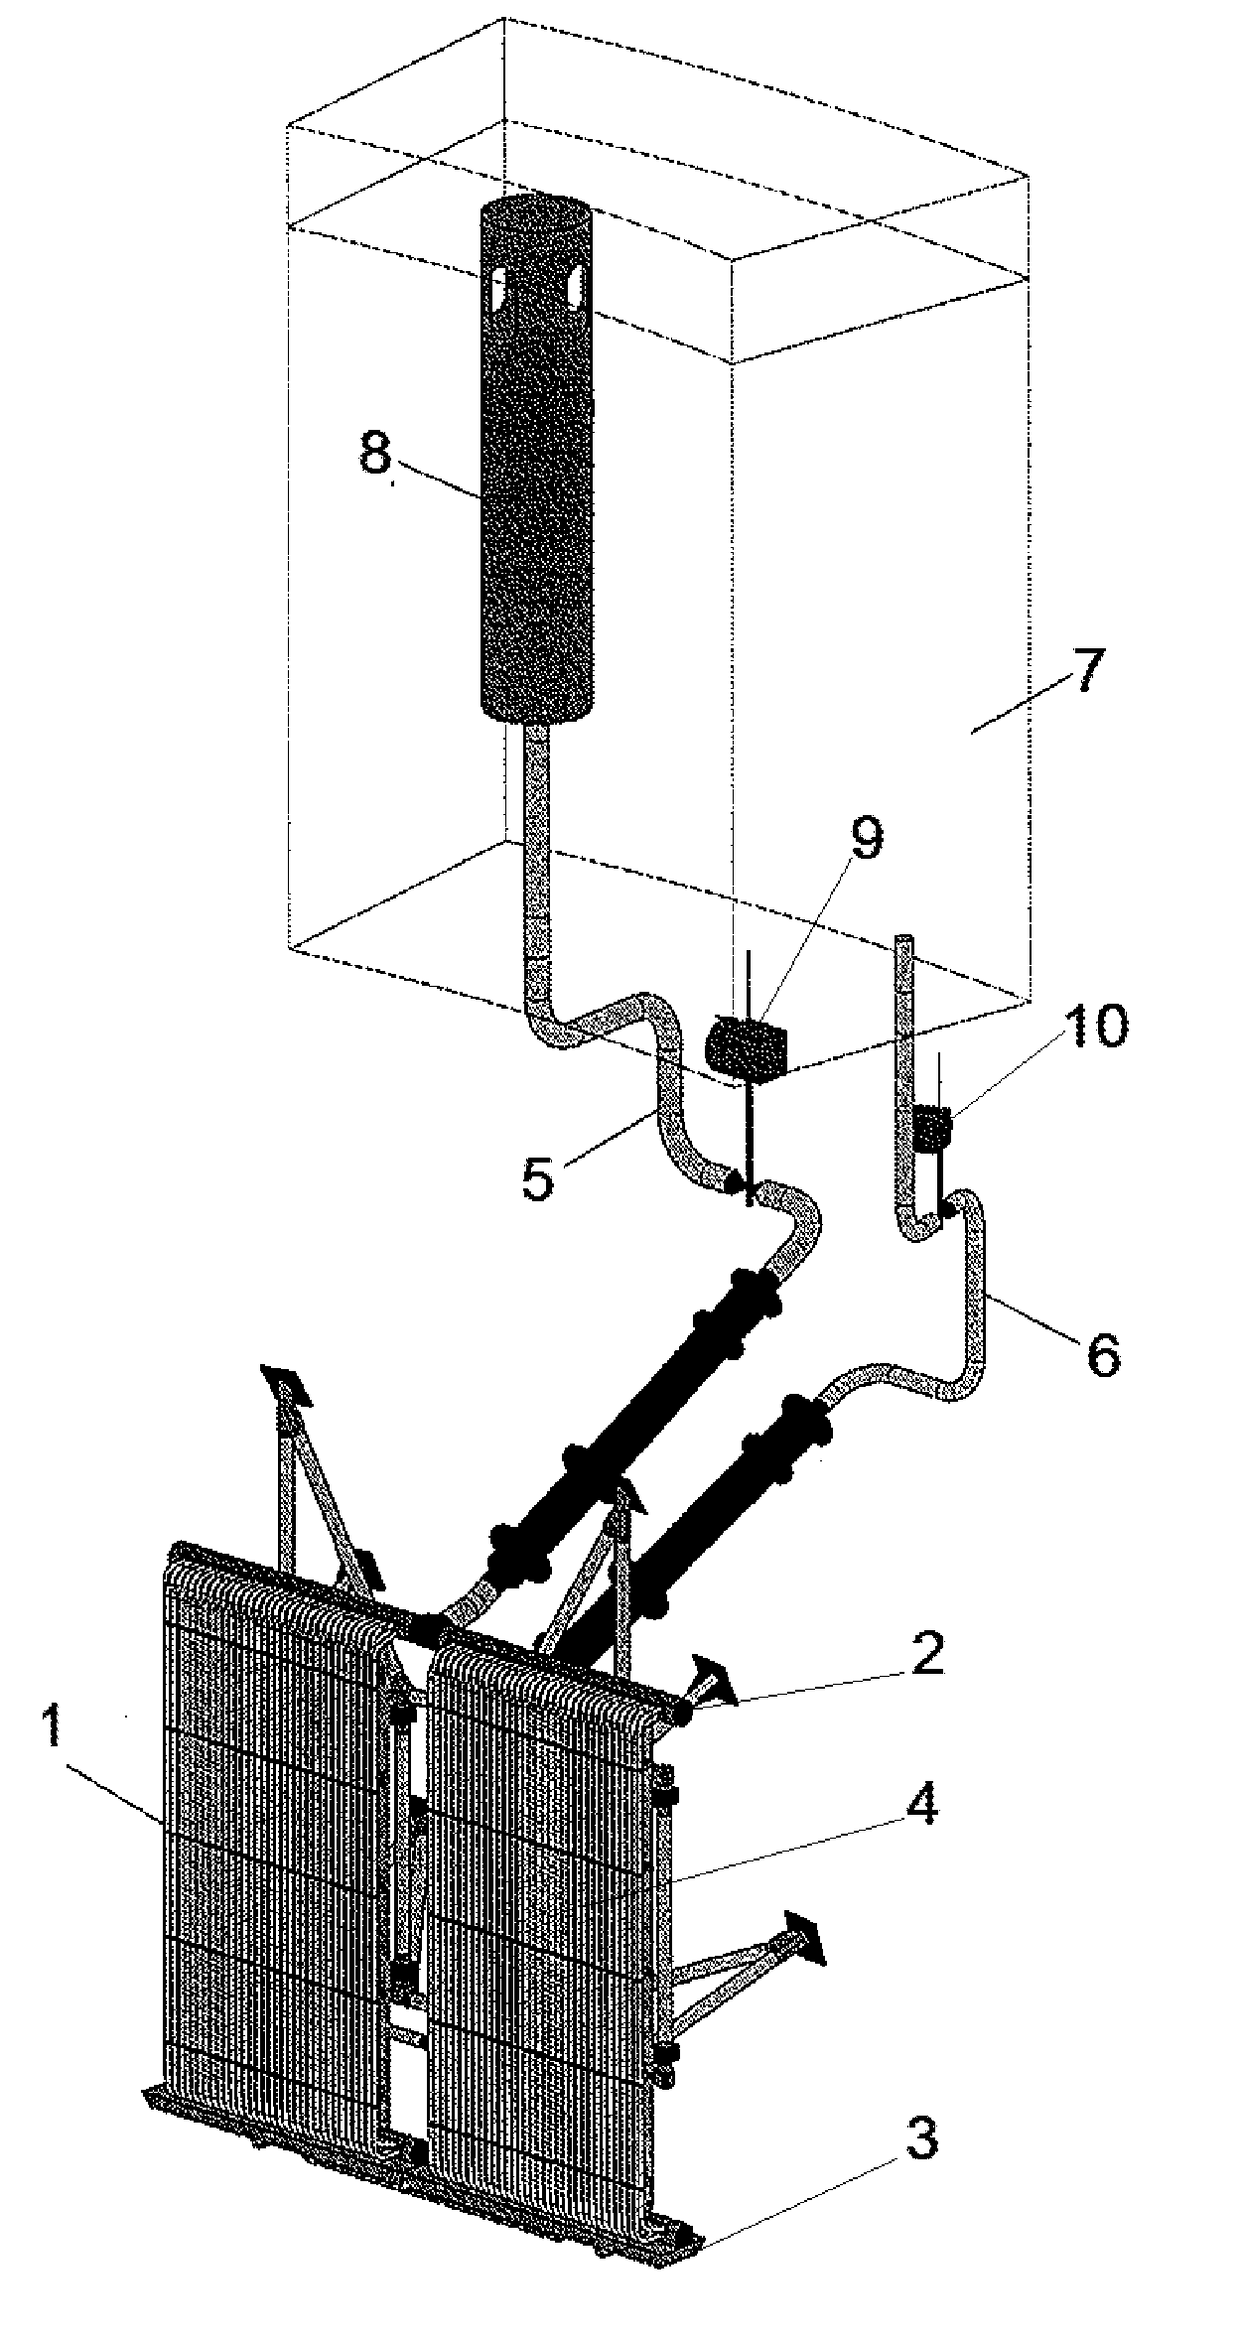 Containment Internal Passive Heat Removal System